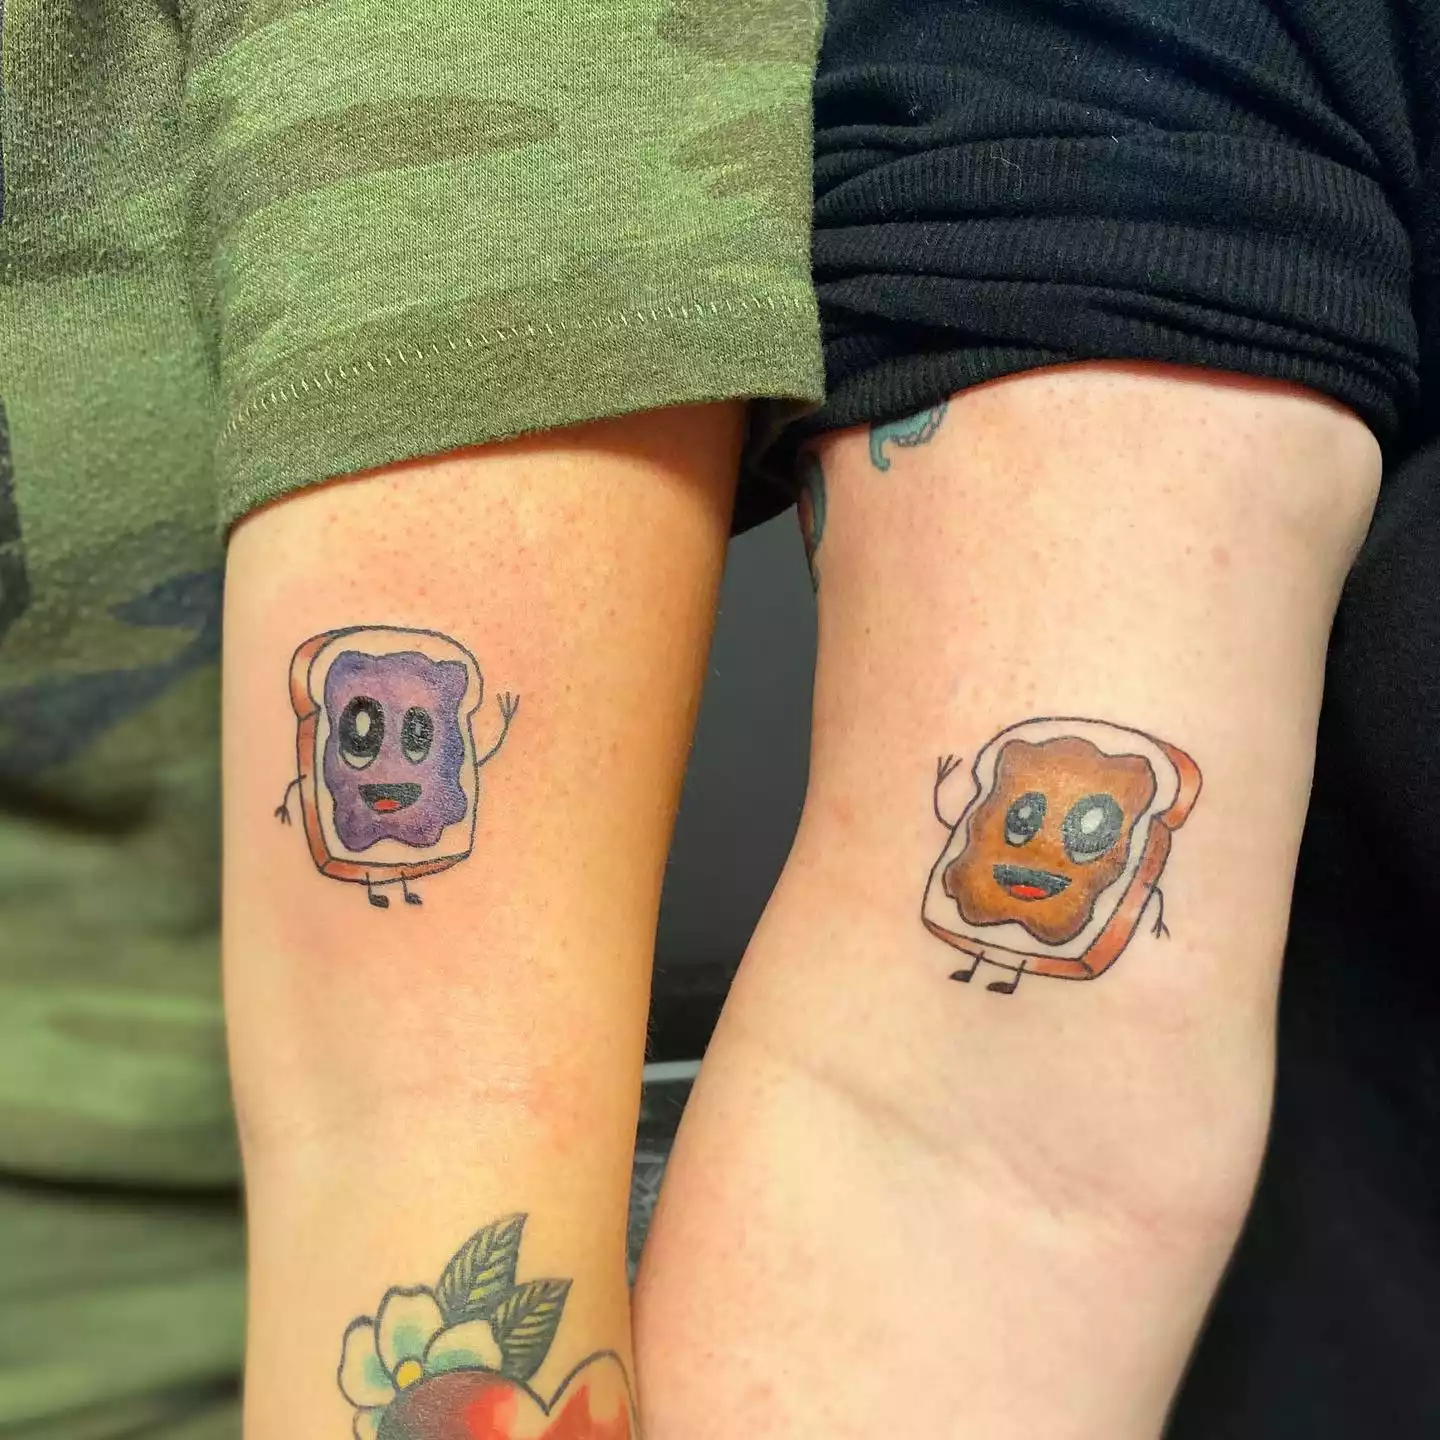 Peanut butter and jelly tattoos on two people's arms